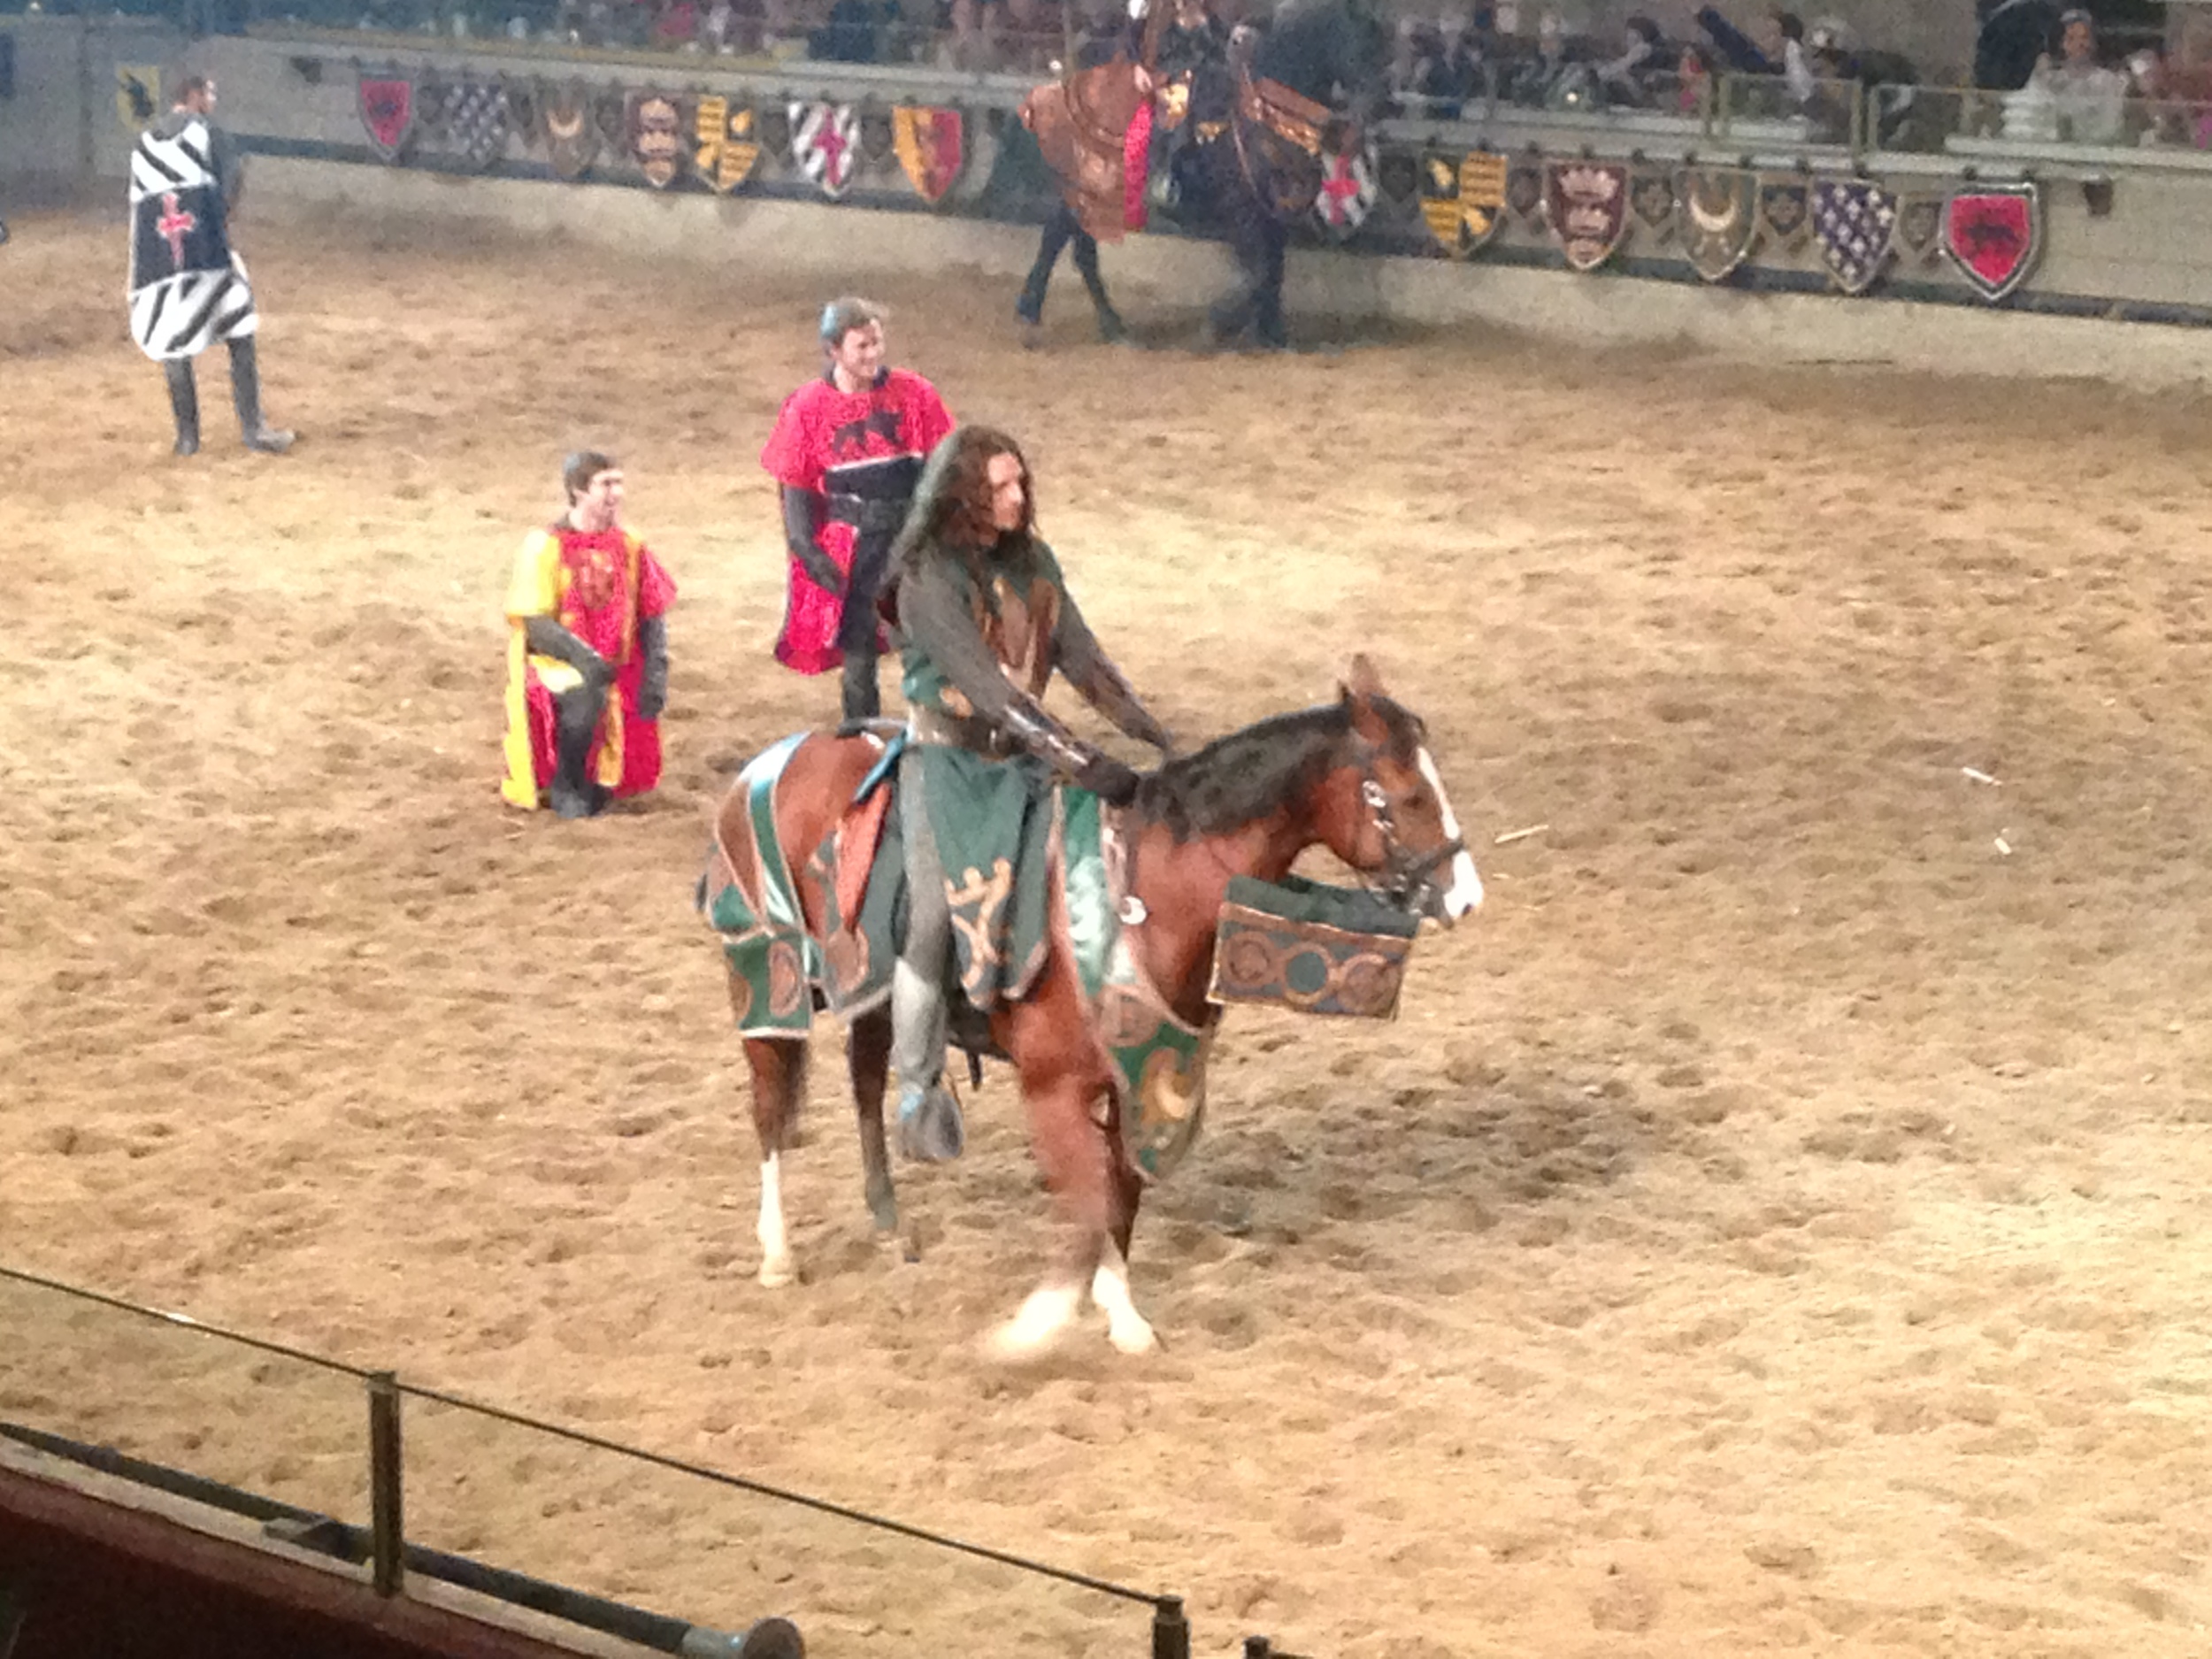  The green knight. He didn't win, but he was one of the last knights standing. 